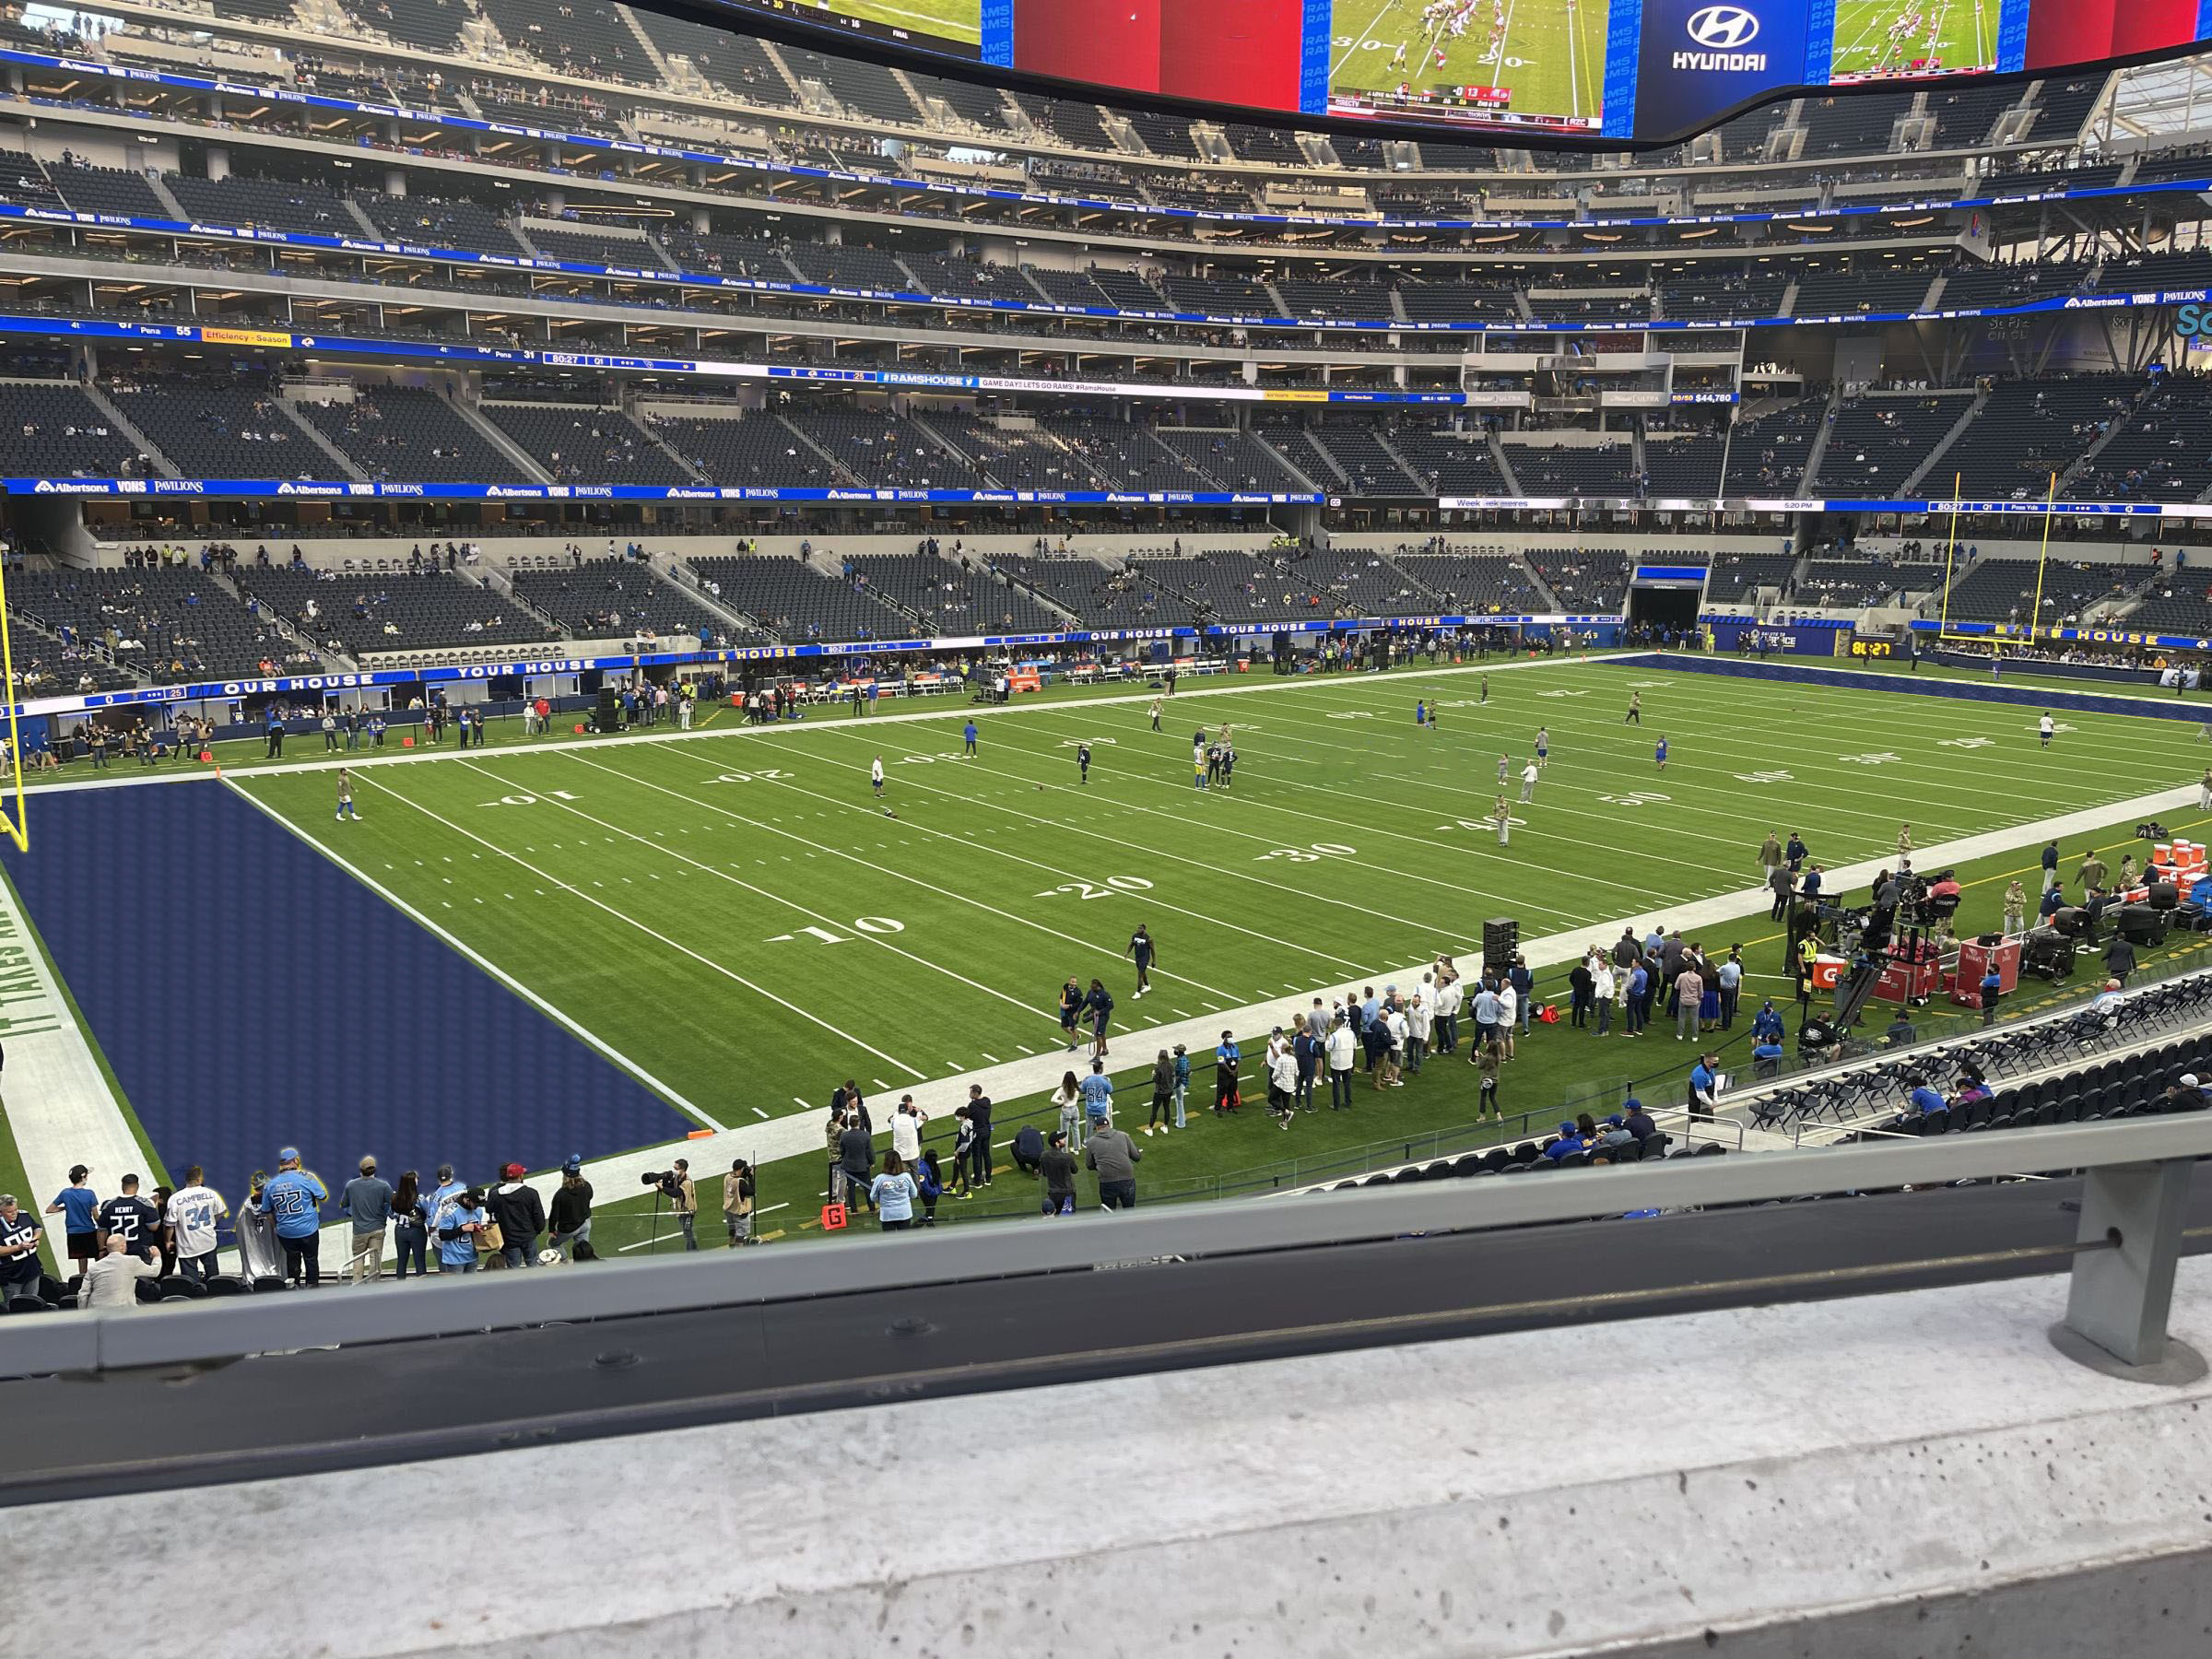 SoFi Stadium (Los Angeles Rams and Chargers) – Sequoia